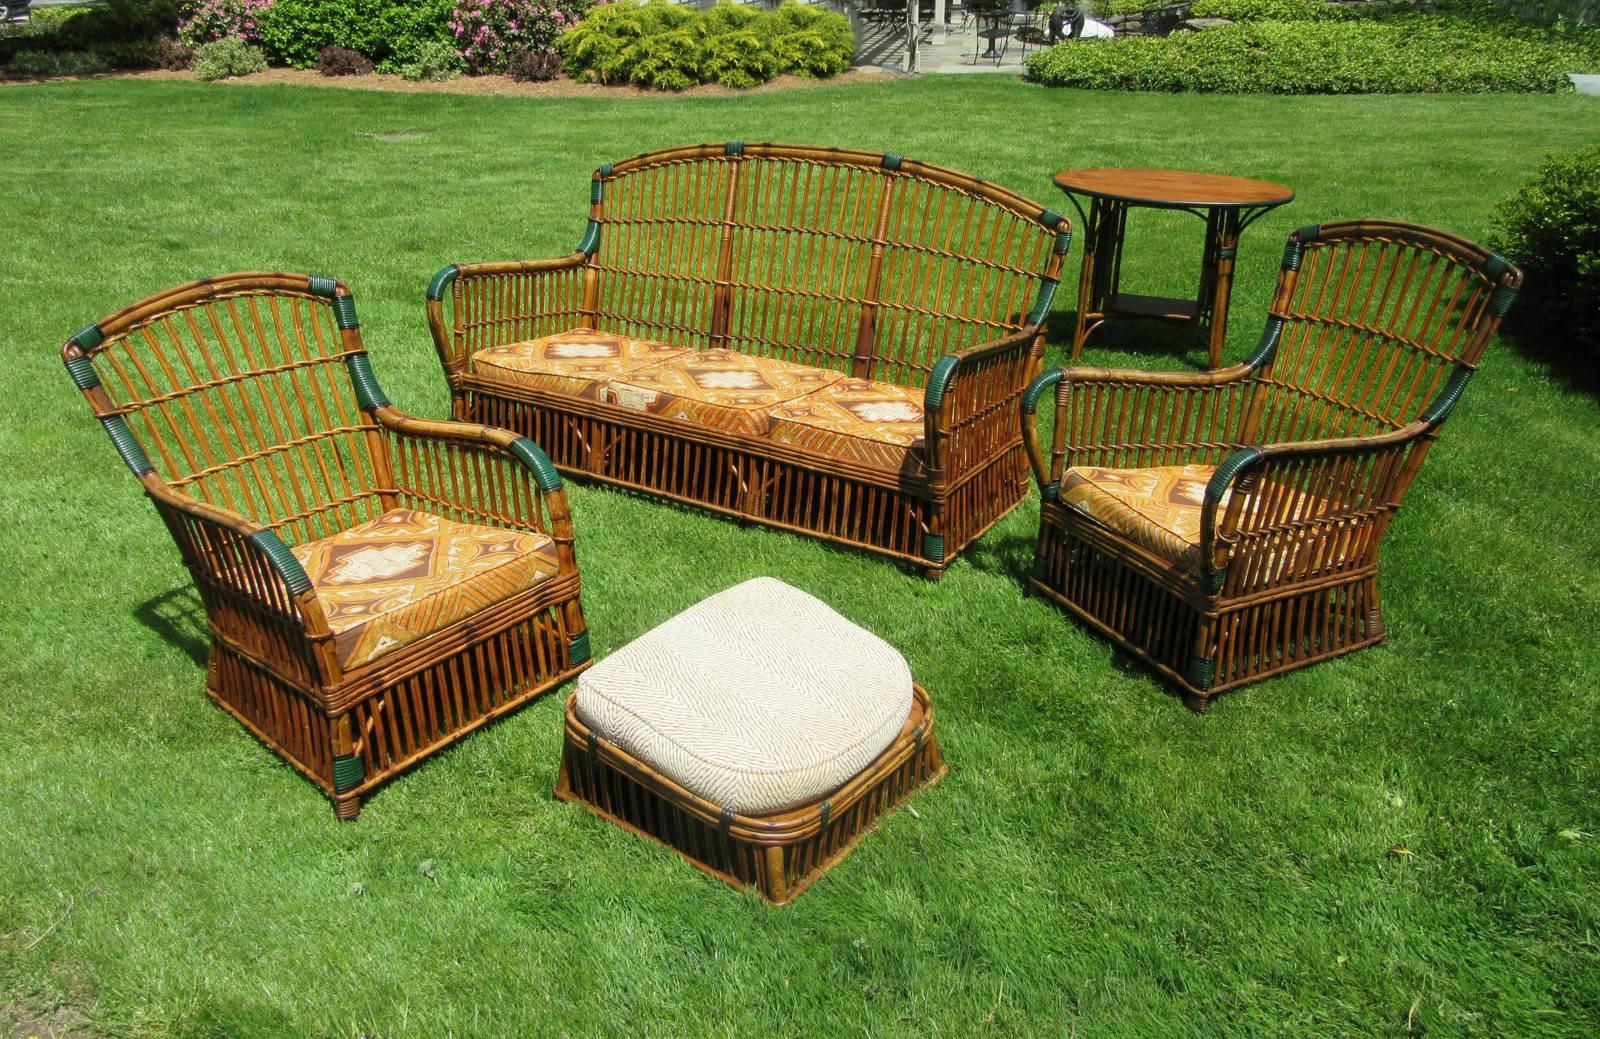 Five-piece matching Rattan suite in honey toned natural stained finish with green and black painted bandings. Stick Wicker style having evenly spaced single vertical rattan strands. 